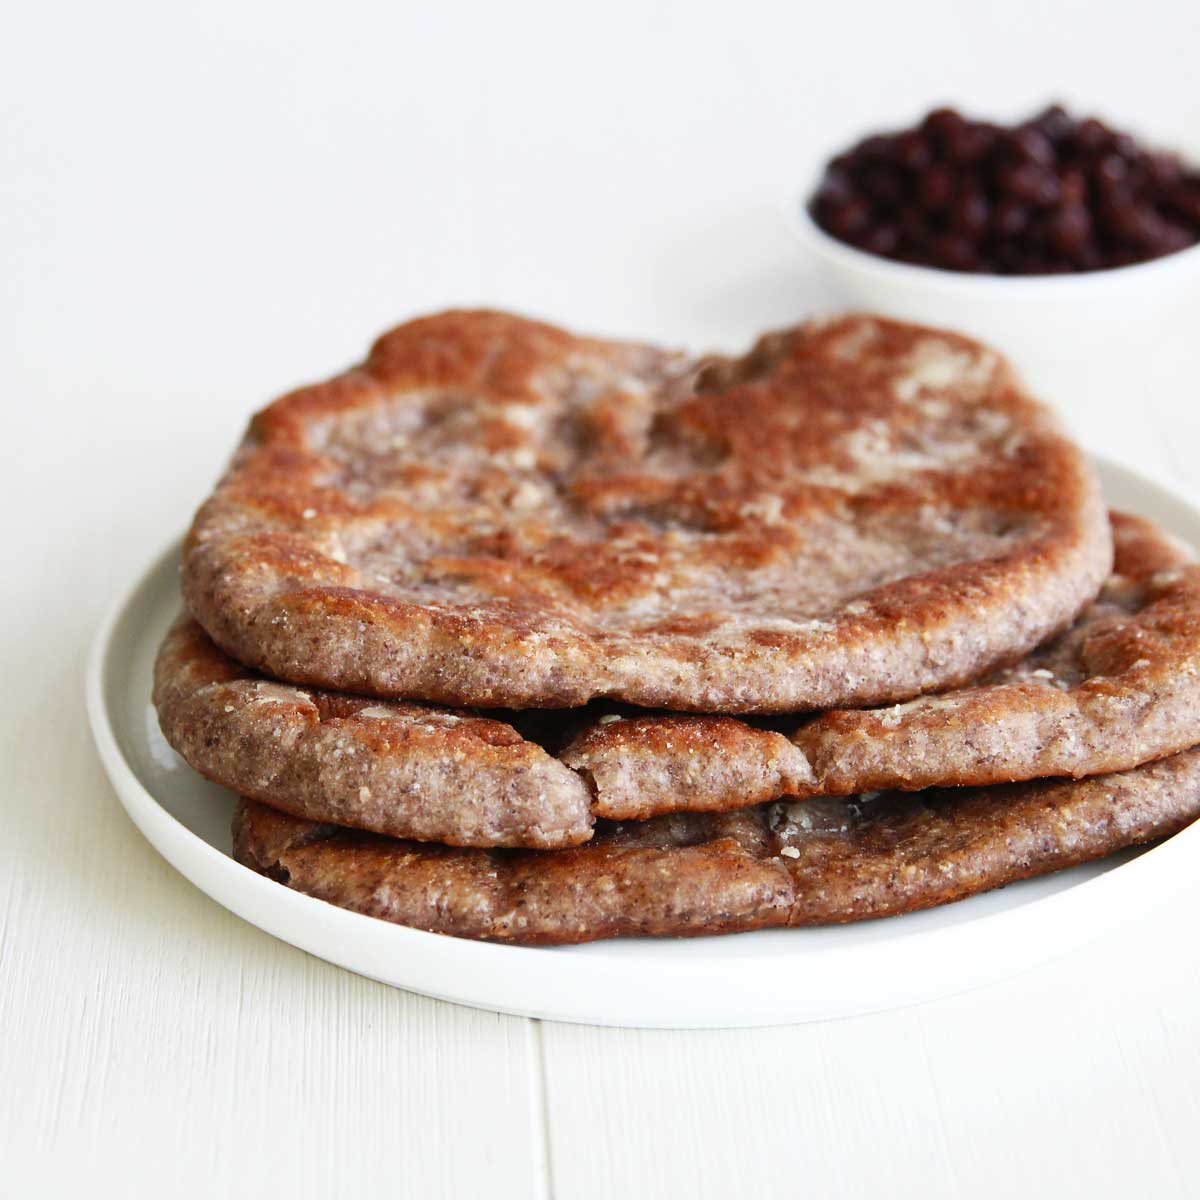 Black Bean Naan (Lower Carb Flatbread Made with Canned Black Beans) - Pumpkin Chocolate Frosting